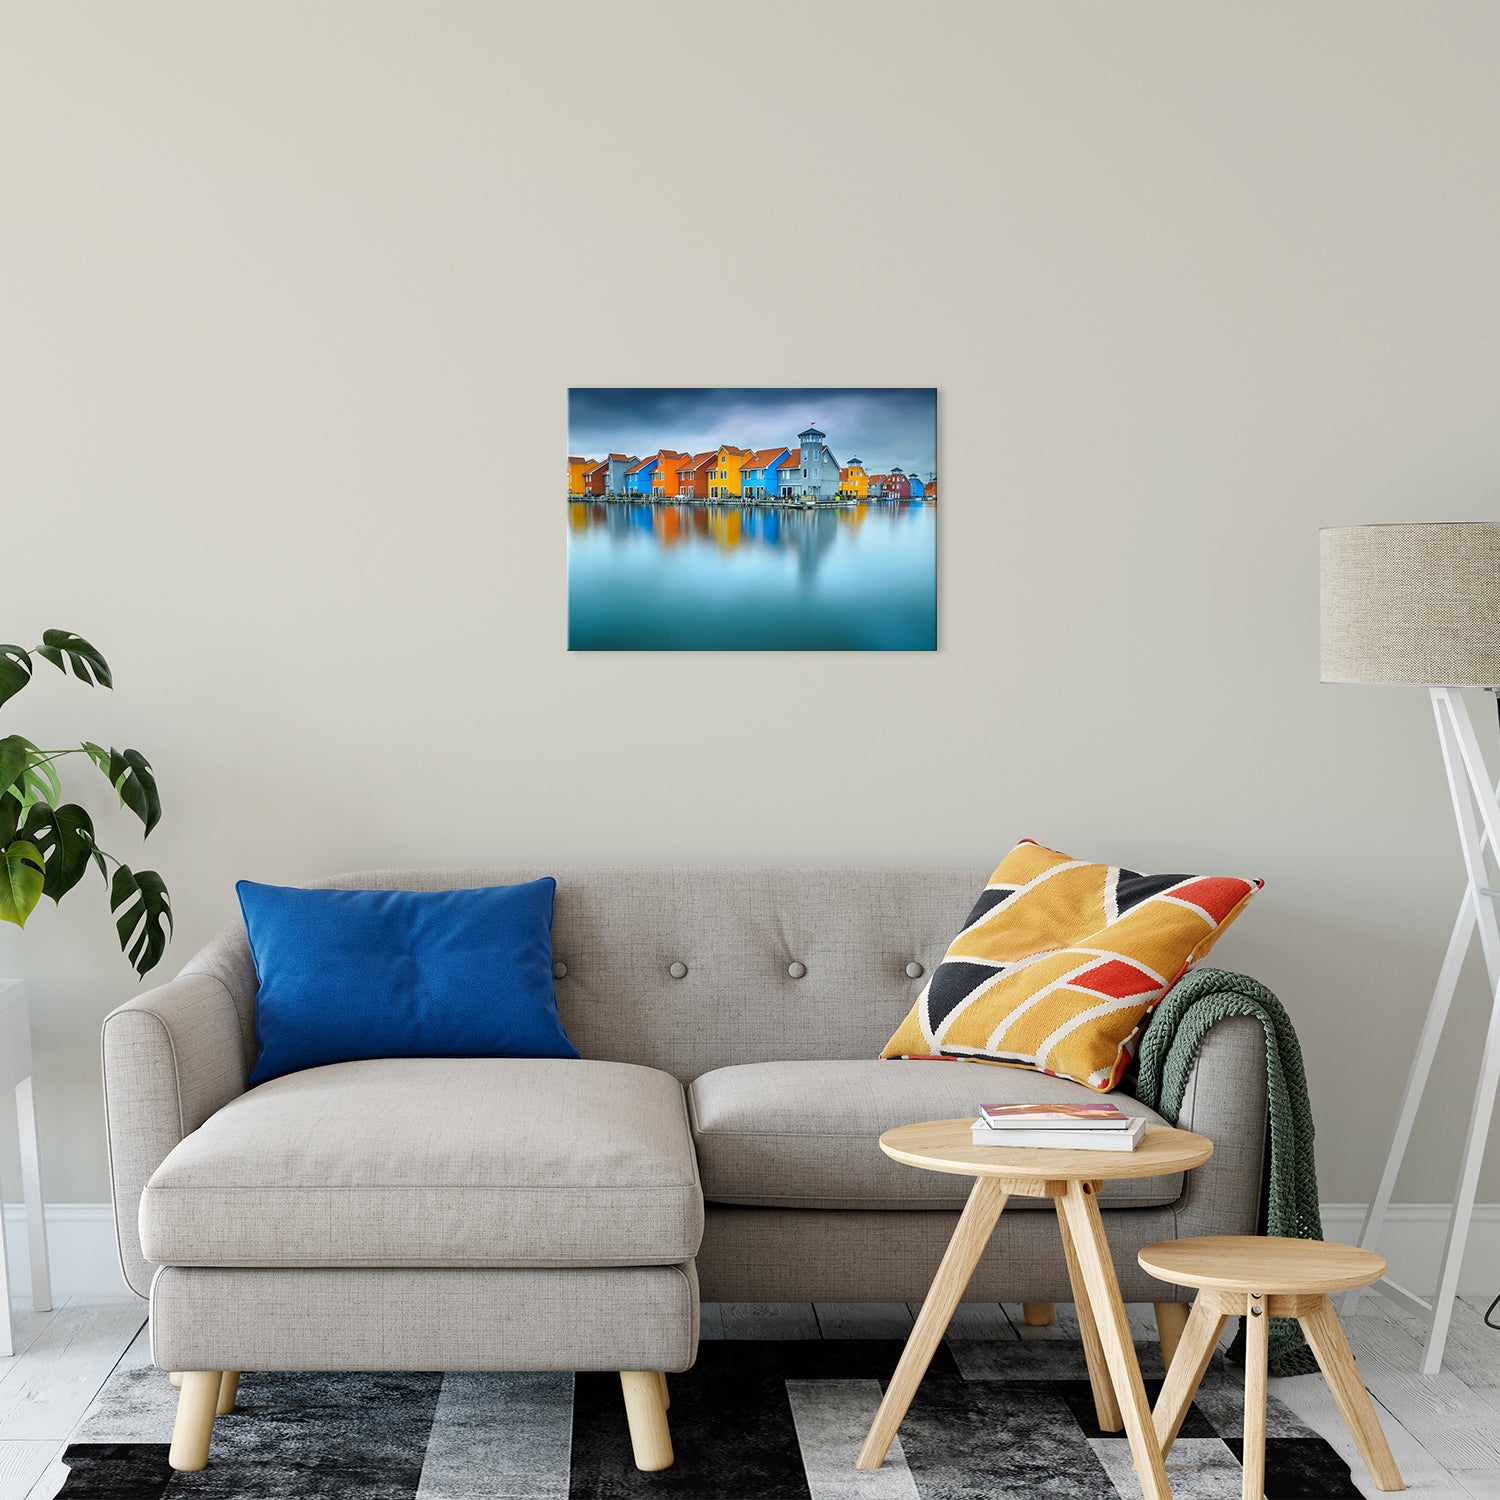 Blue Morning at Waters Edge Groningen Netherlands Europe Landscape Wall Art Canvas Prints 20" x 24" - PIPAFINEART